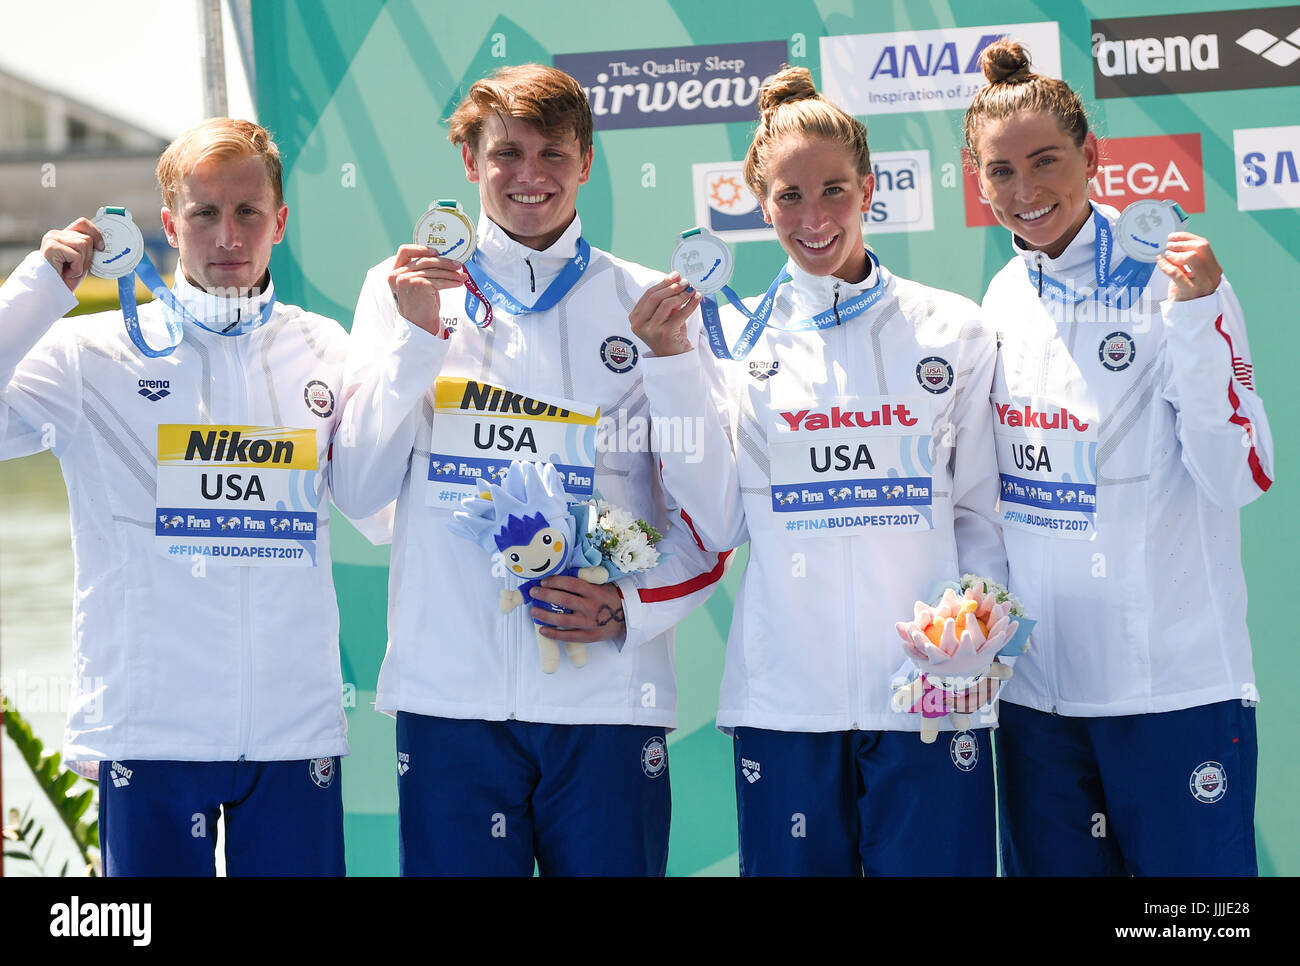 Balatonfuered, Hungary. 20th July, 2017. Jordan Wilimovsky (l-r), Brendan Casey, Ashley Twichell and Haley Anderson of the USA celebrate with their silver medals after the open water 5km team relay event of the FINA World Championships in Balatonfuered, Hungary, 20 July 2017. Photo: Axel Heimken/dpa/Alamy Live News Stock Photo